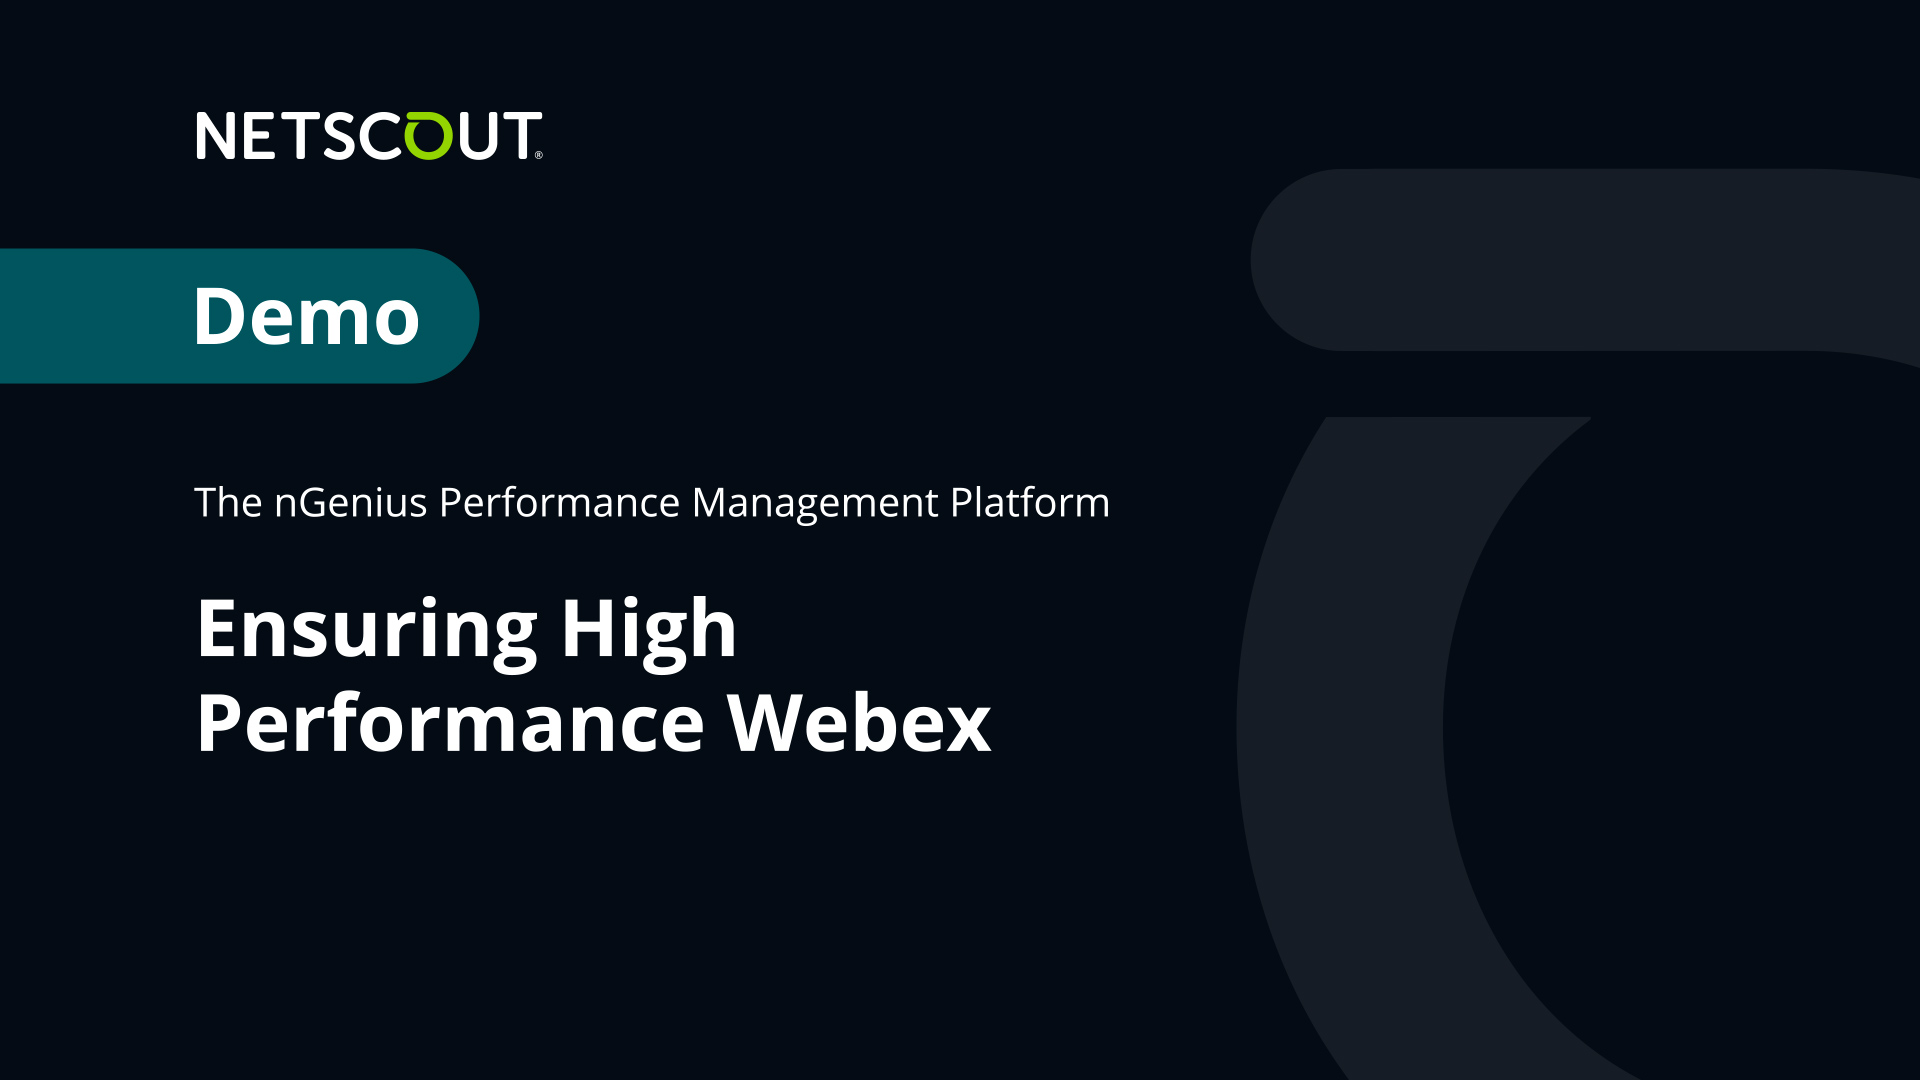 How to Assure Webex Performance with nGenius Enterprise Performance Management